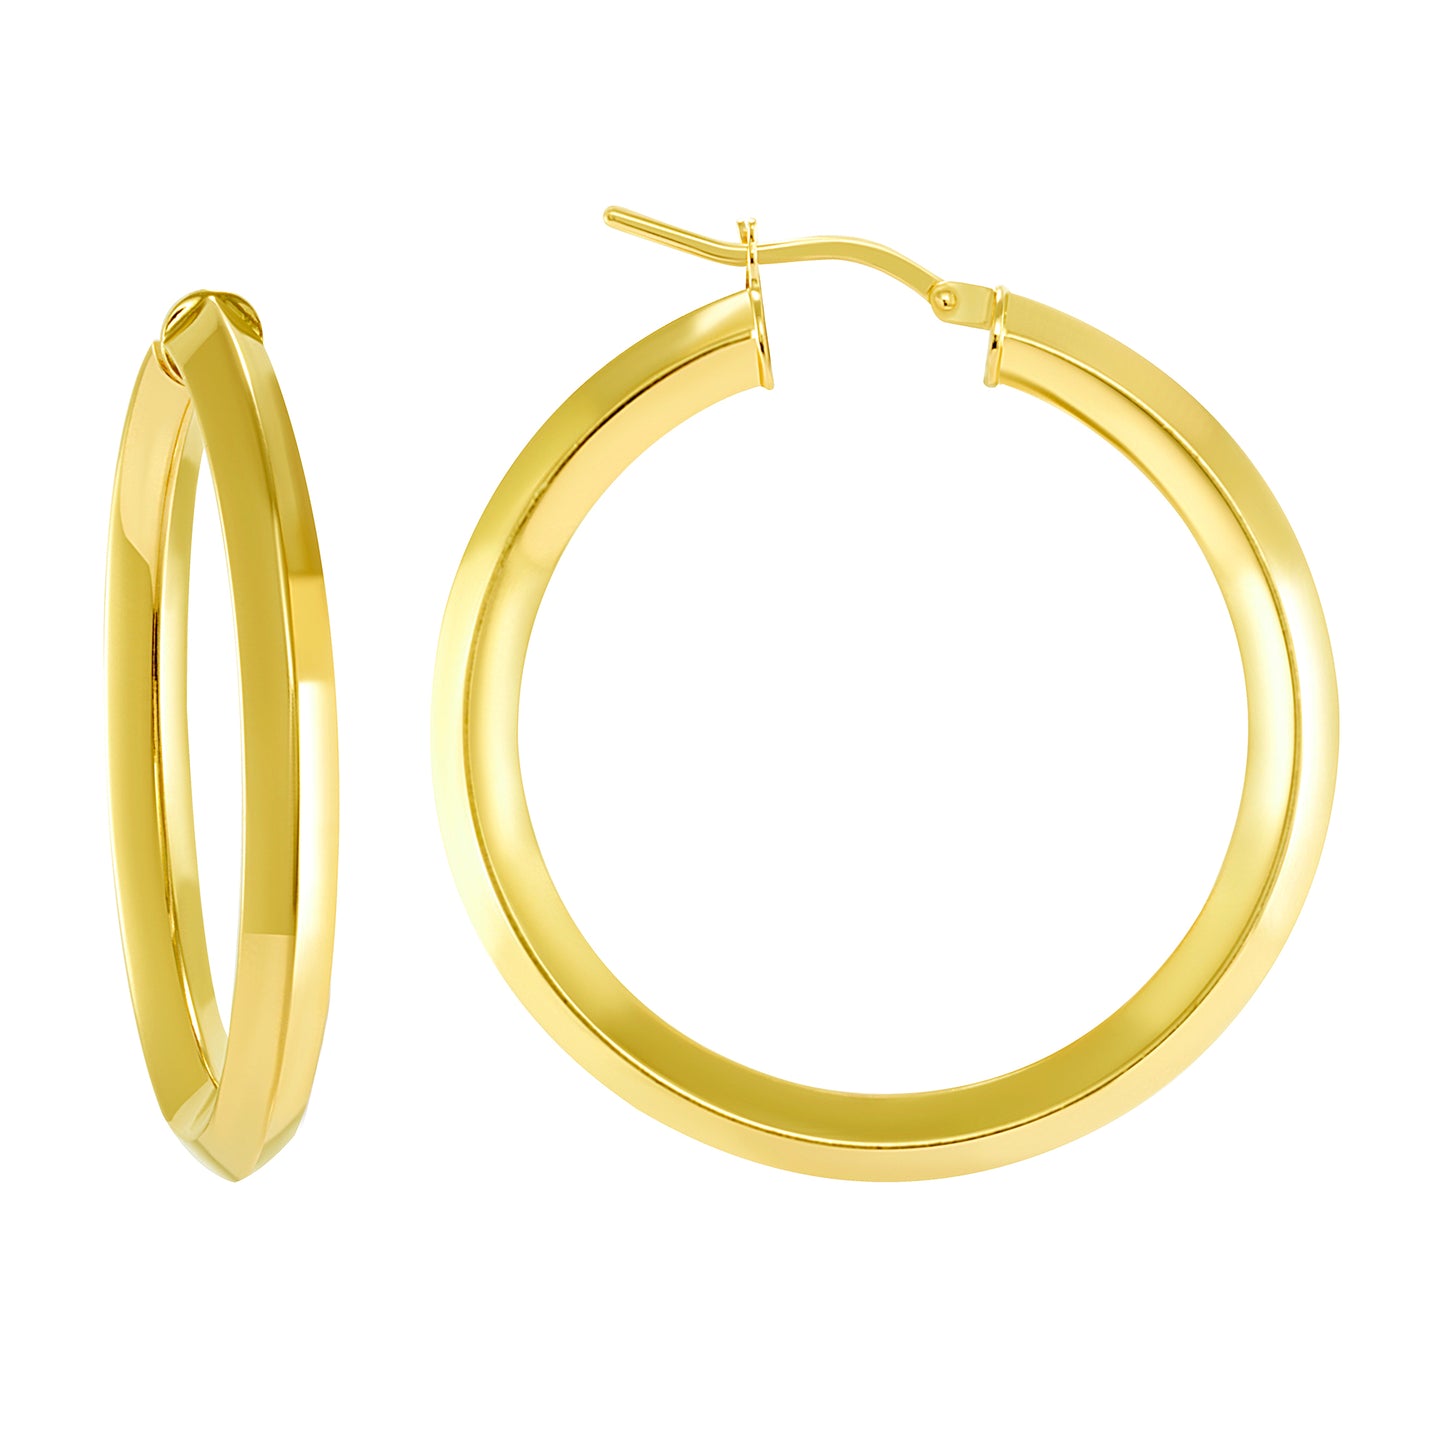 Silver 925 Gold Plated Plain 3D Design 30MM Hoop Earring. ITHP98-30MMG